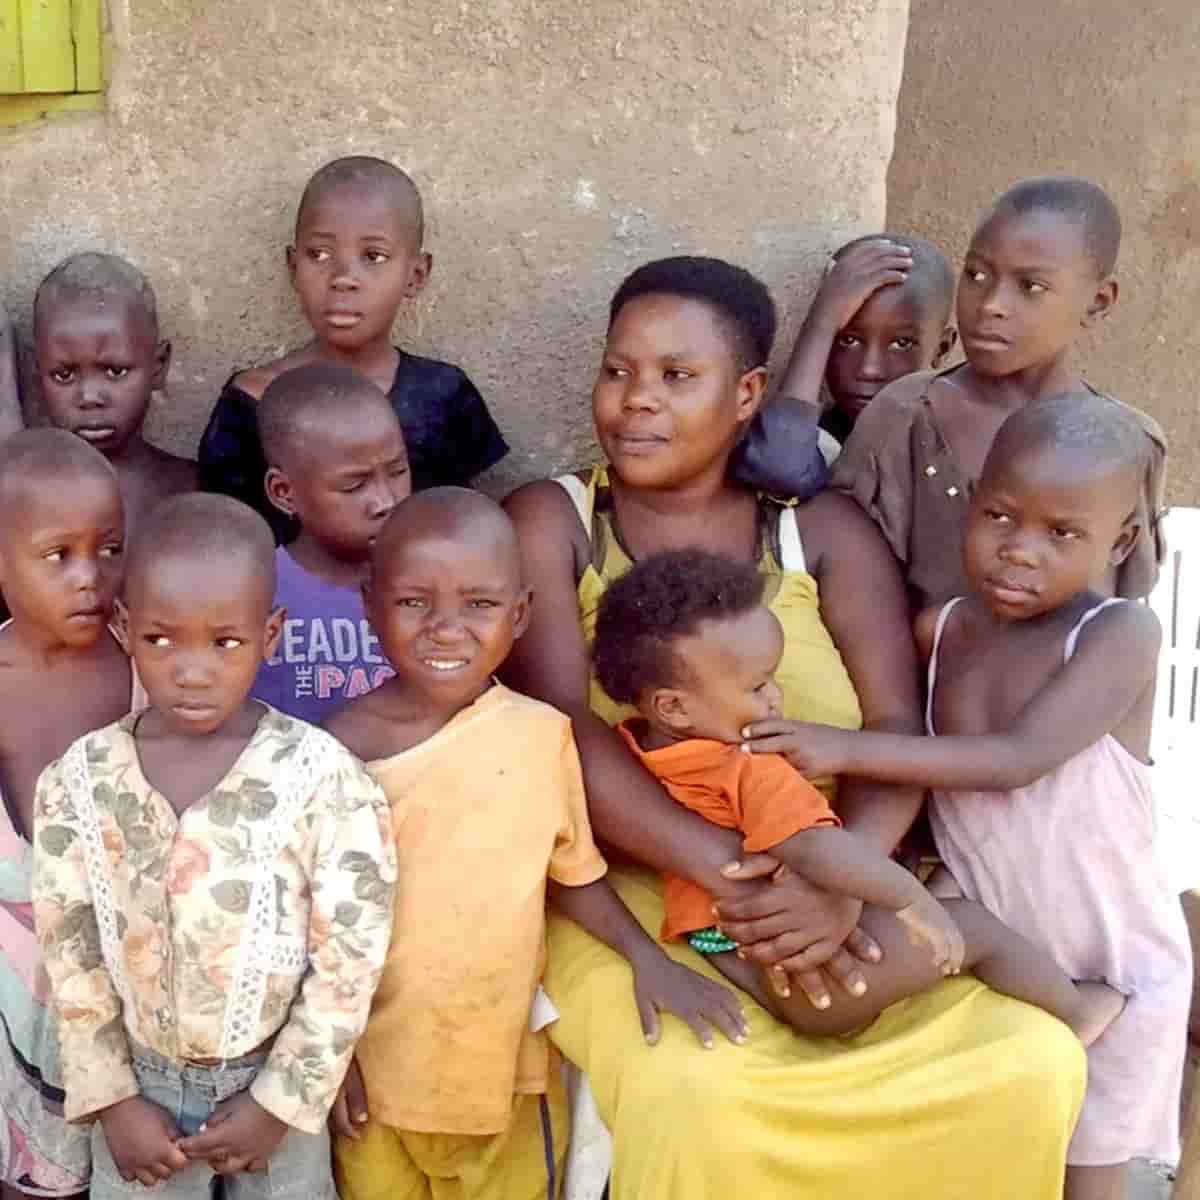 44-year-old African mother of 40 children, life is chaotic, difficult but always happy
